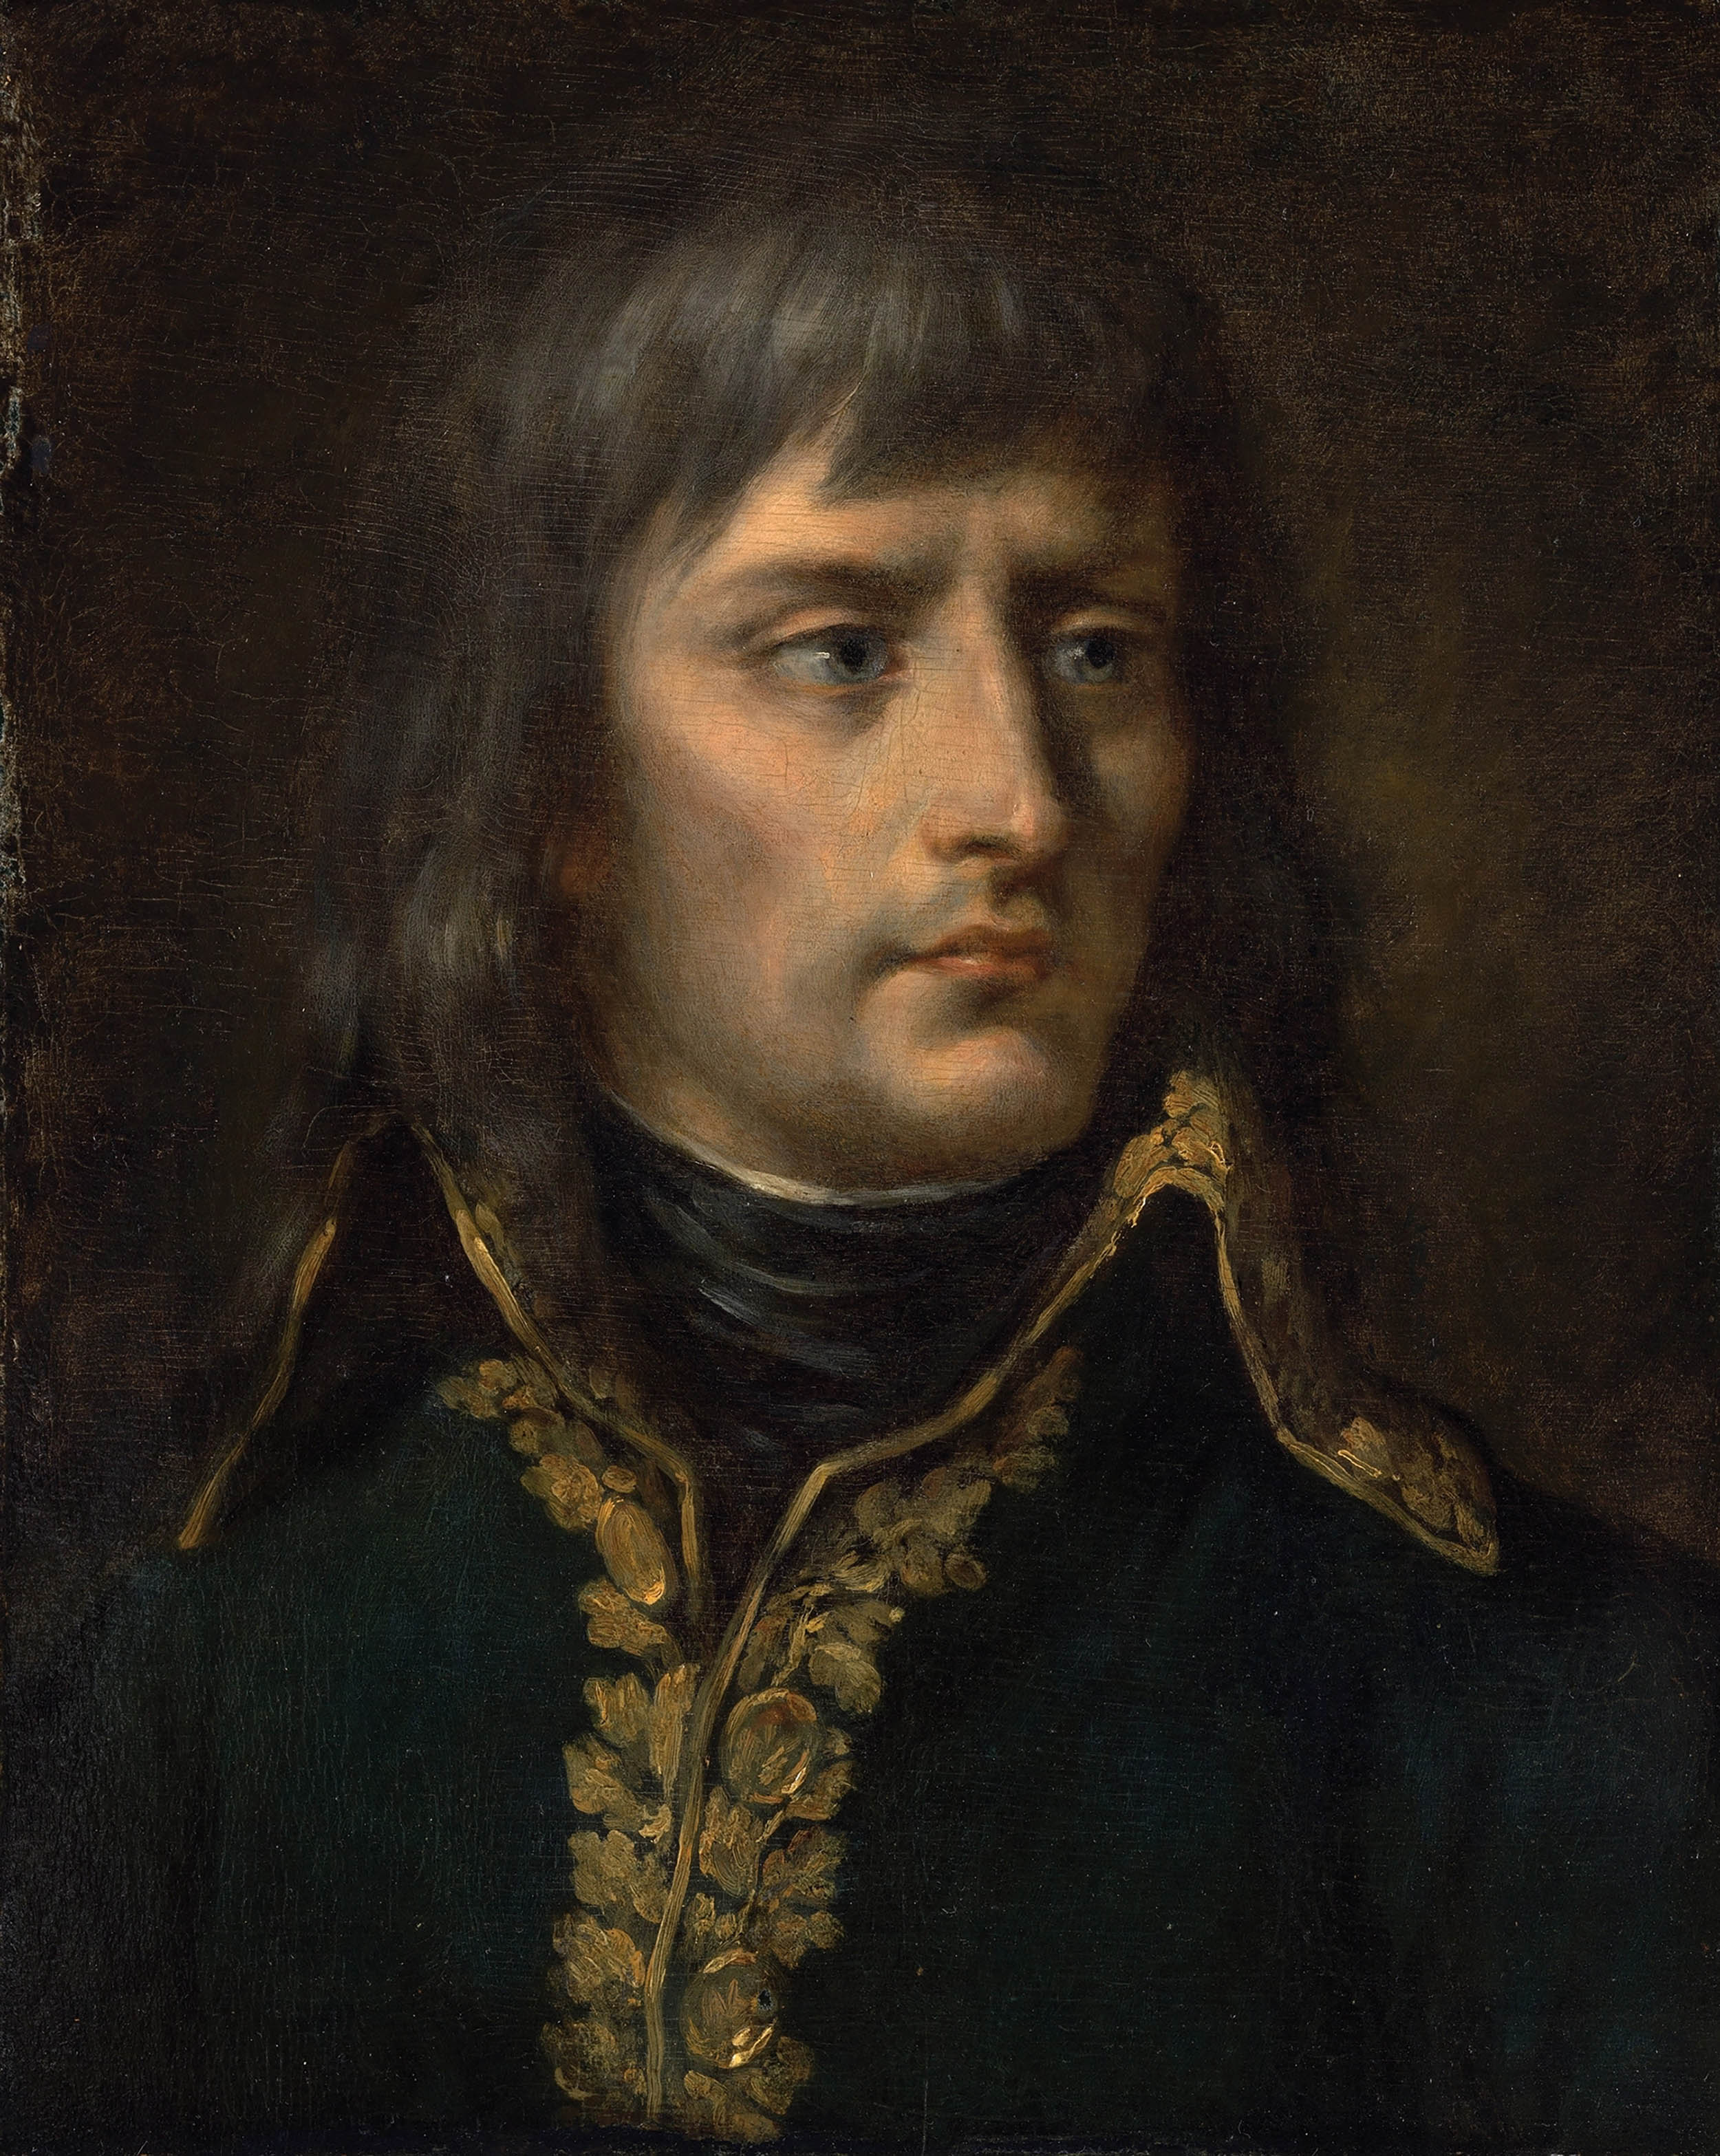 Napoleon Bonaparte, French painting probably based on 1798 engraving by Elisabeth Herhan and Franz Gabriel Fiesinger, after drawing by Jean Urbain Guérin, oil on wood (Metropolitan Museum of Art)